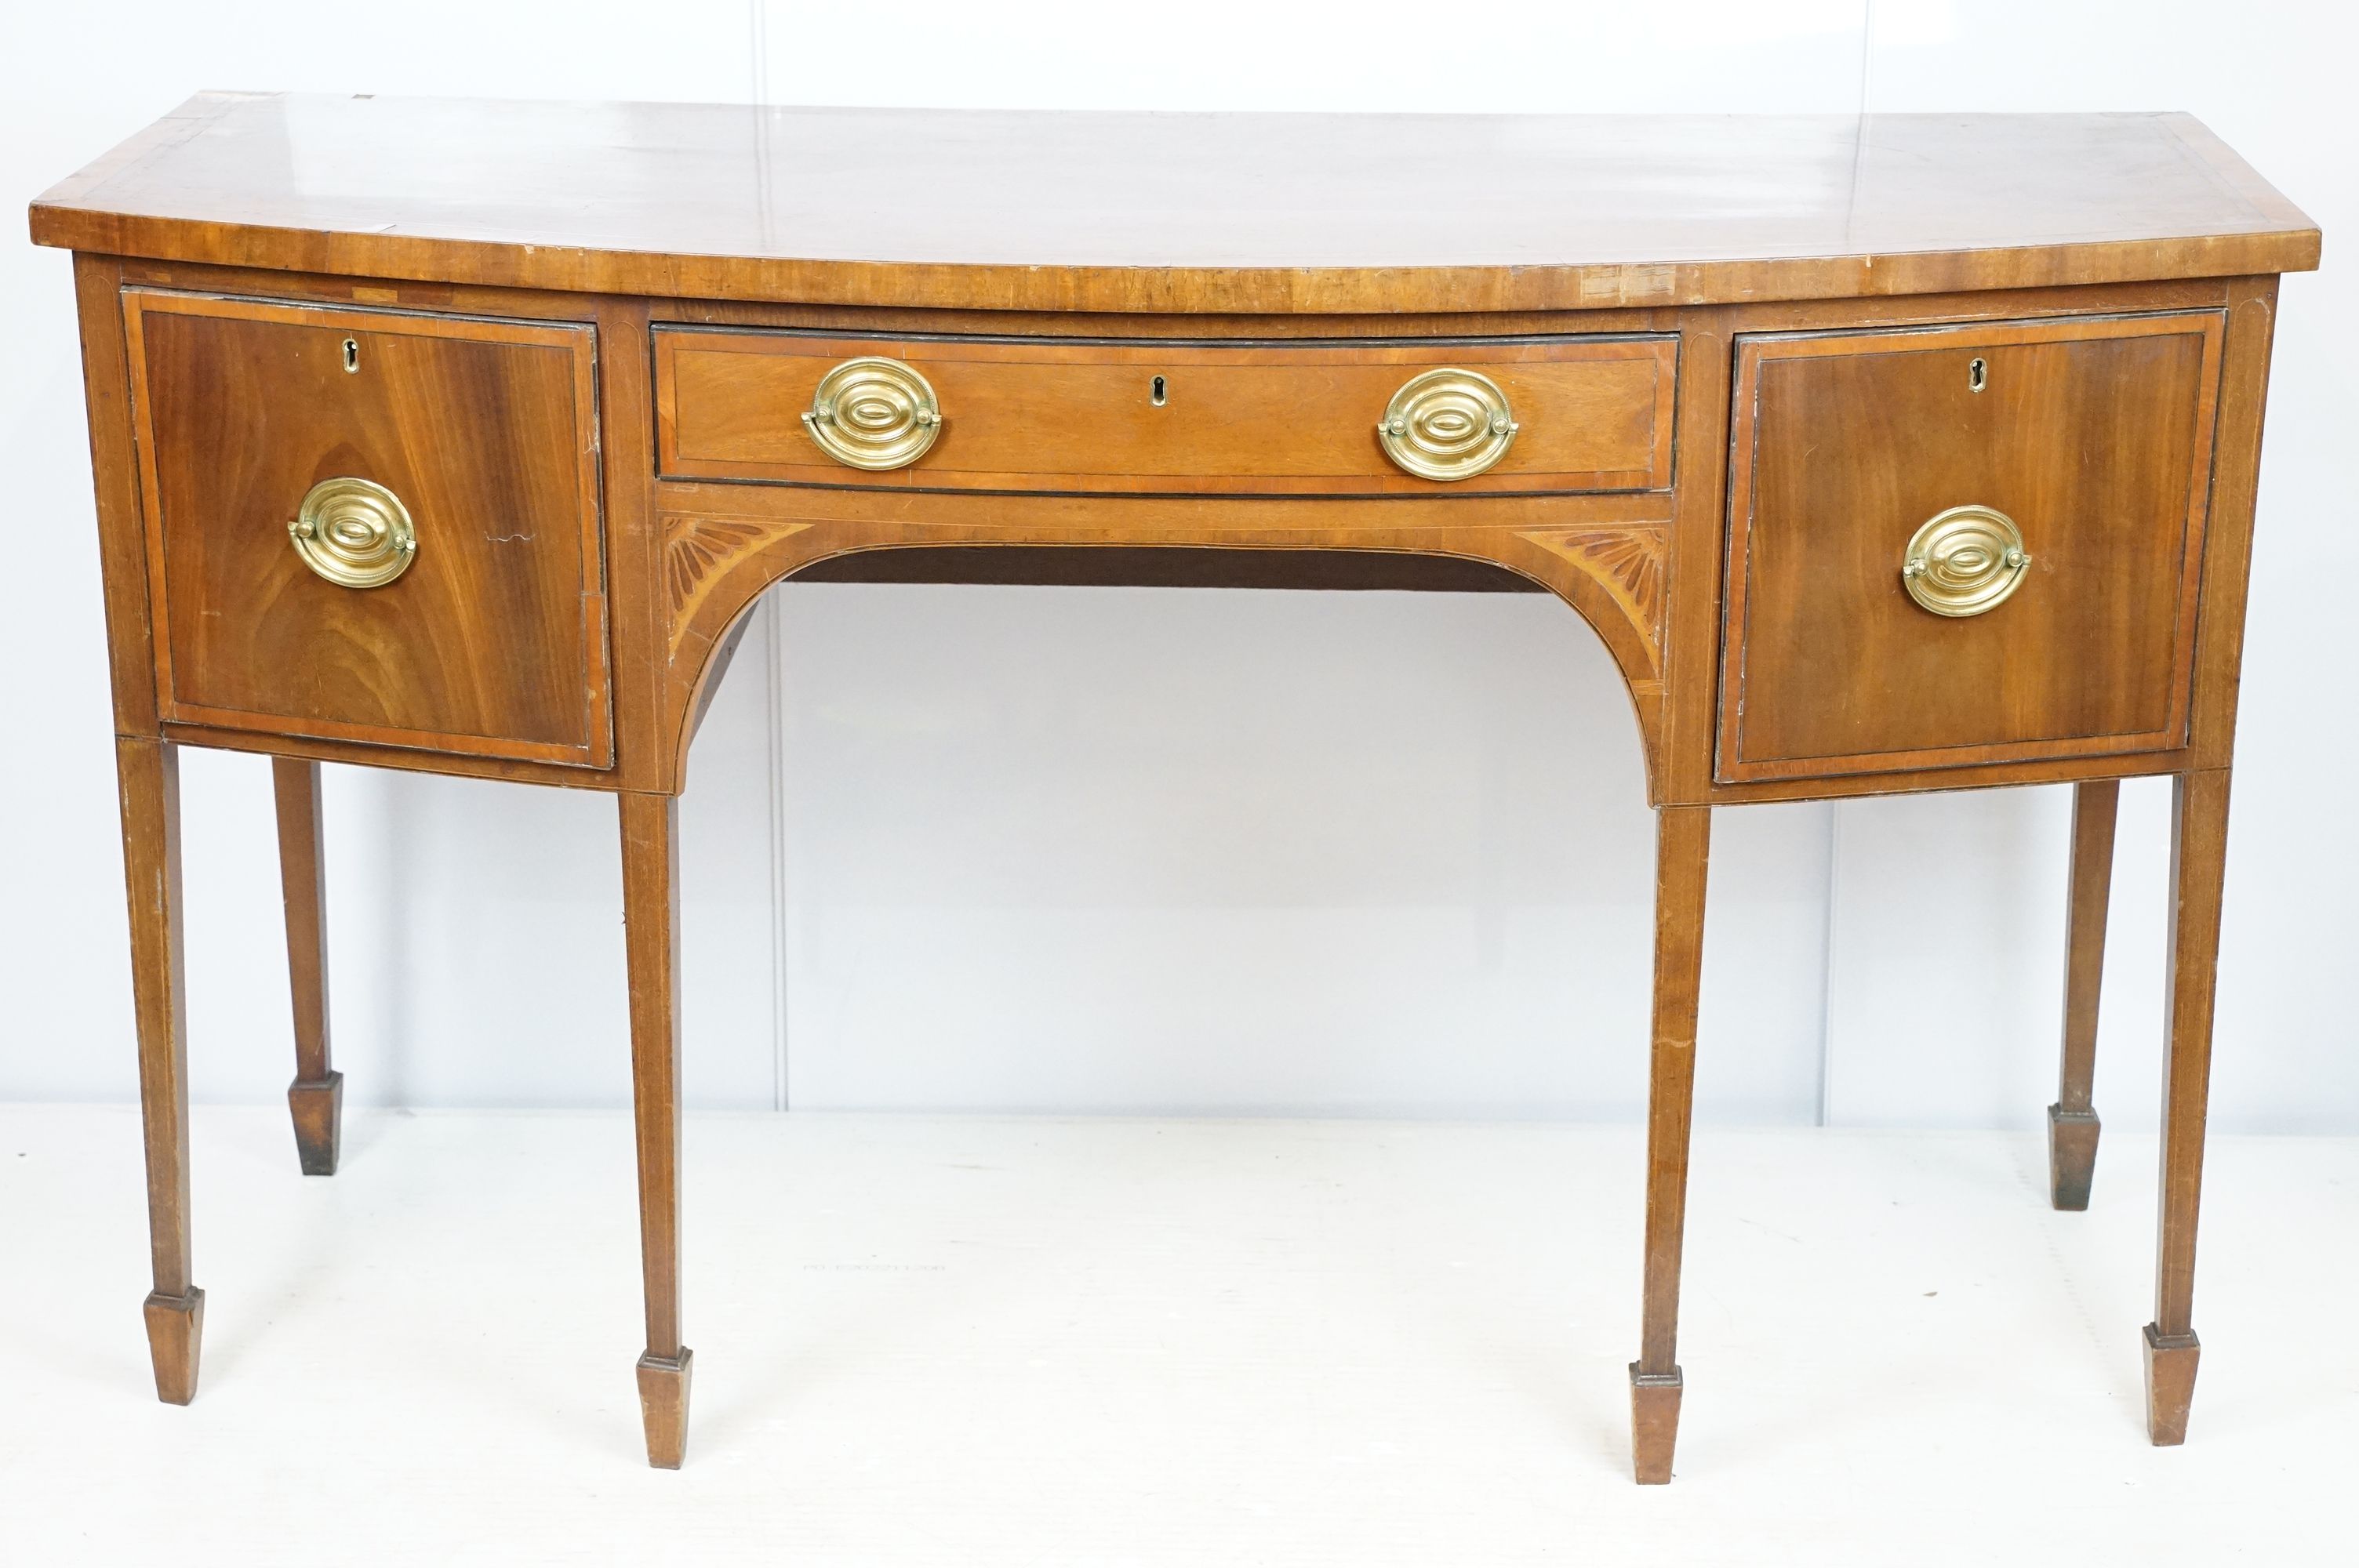 Edwardian mahogany inlaid bowfront sideboard, the central drawer flanked by two cupboard doors, on